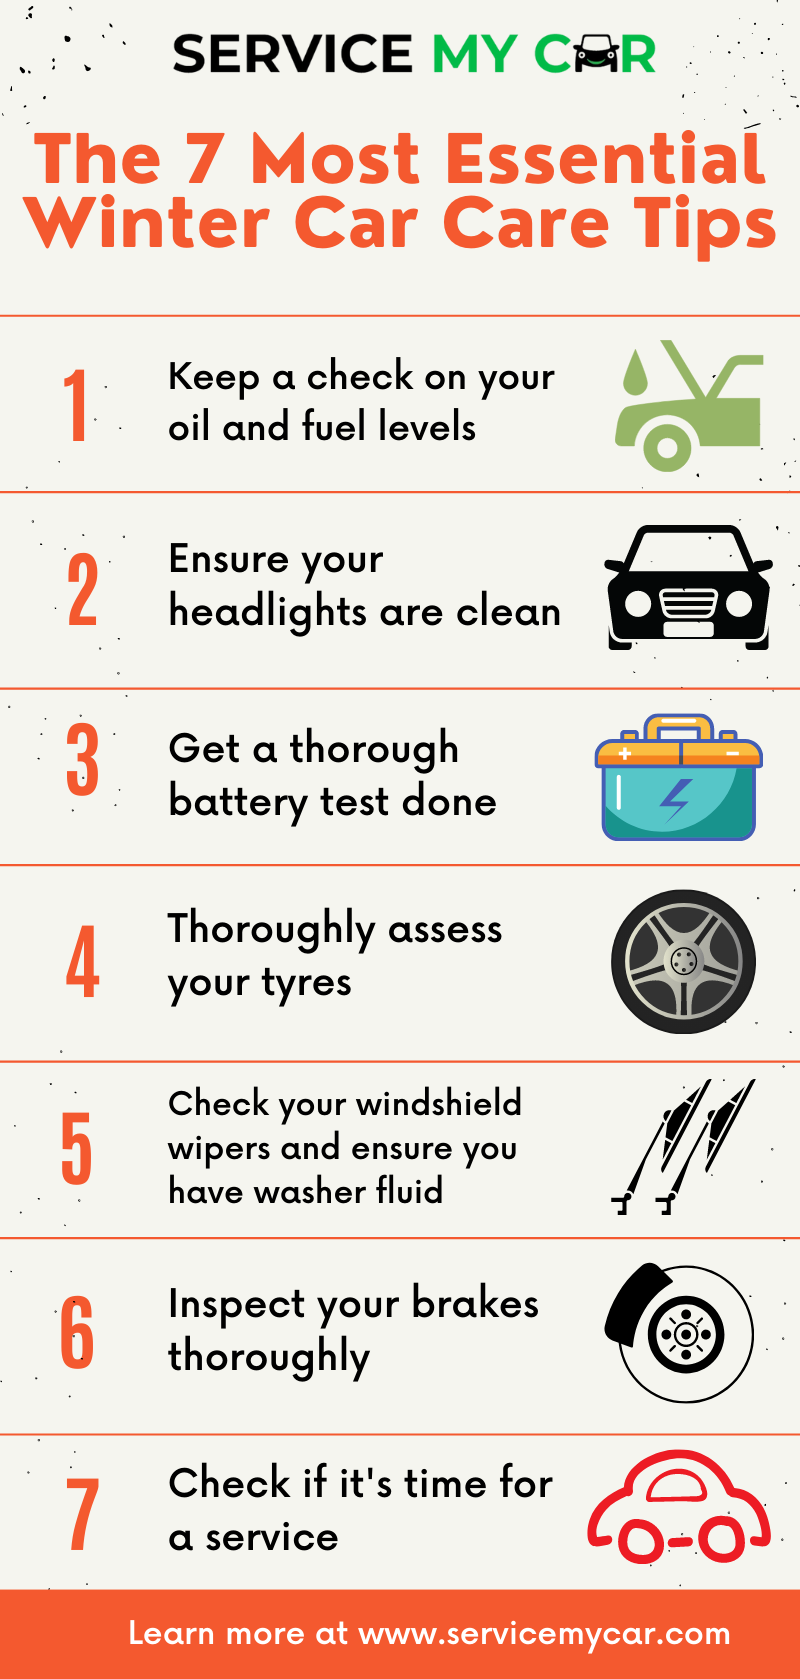 The 7 Most Essential Winter Car Care Tips